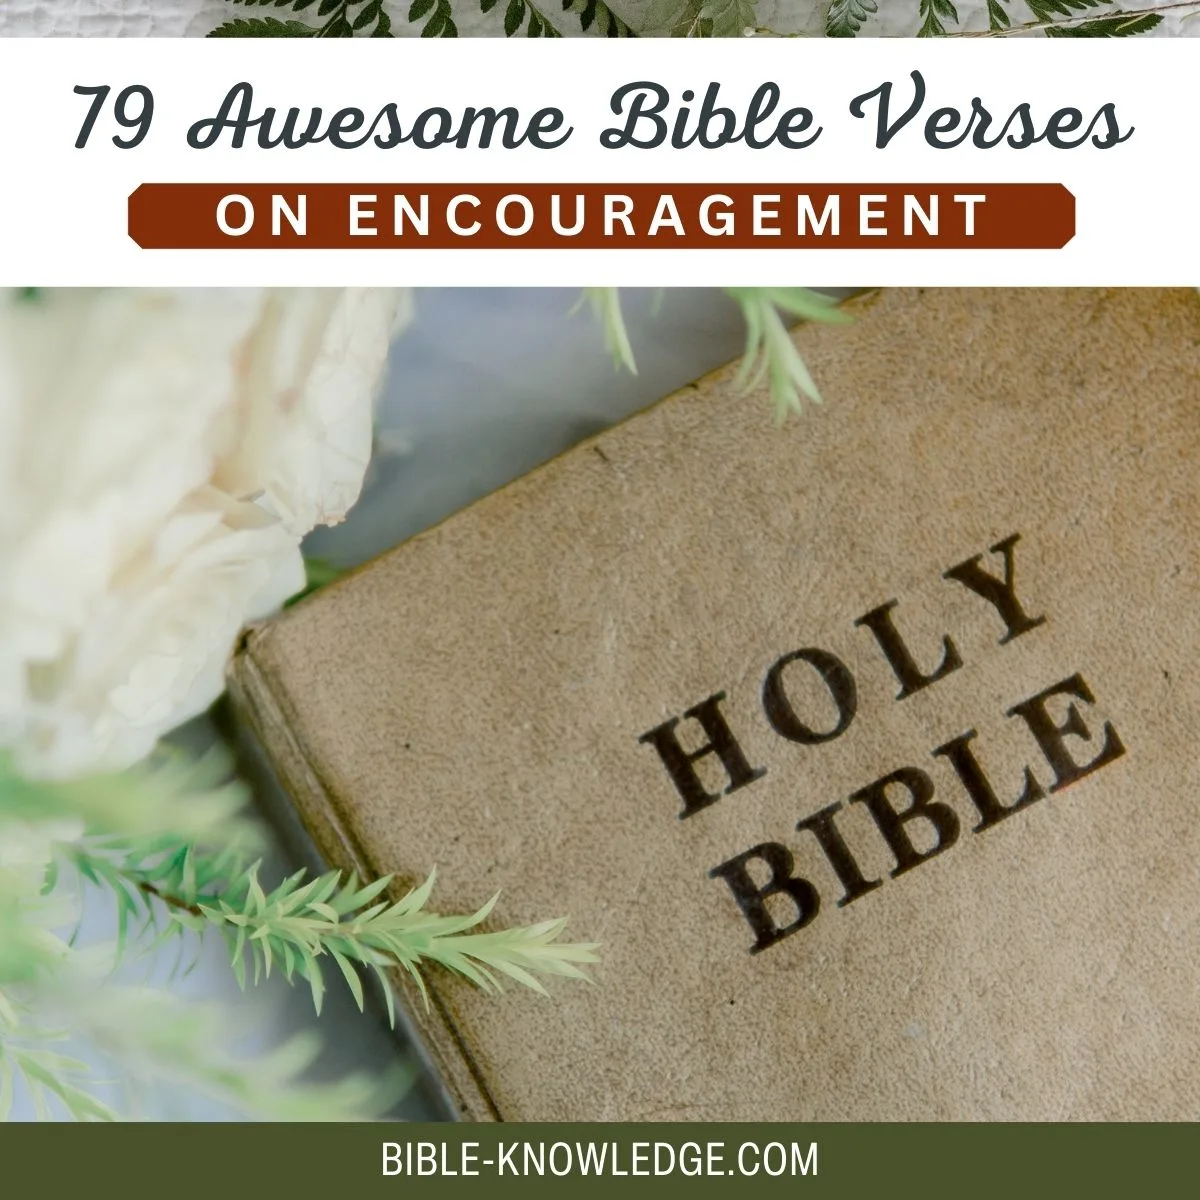 79 Awesome Bible Verses on Encouragement